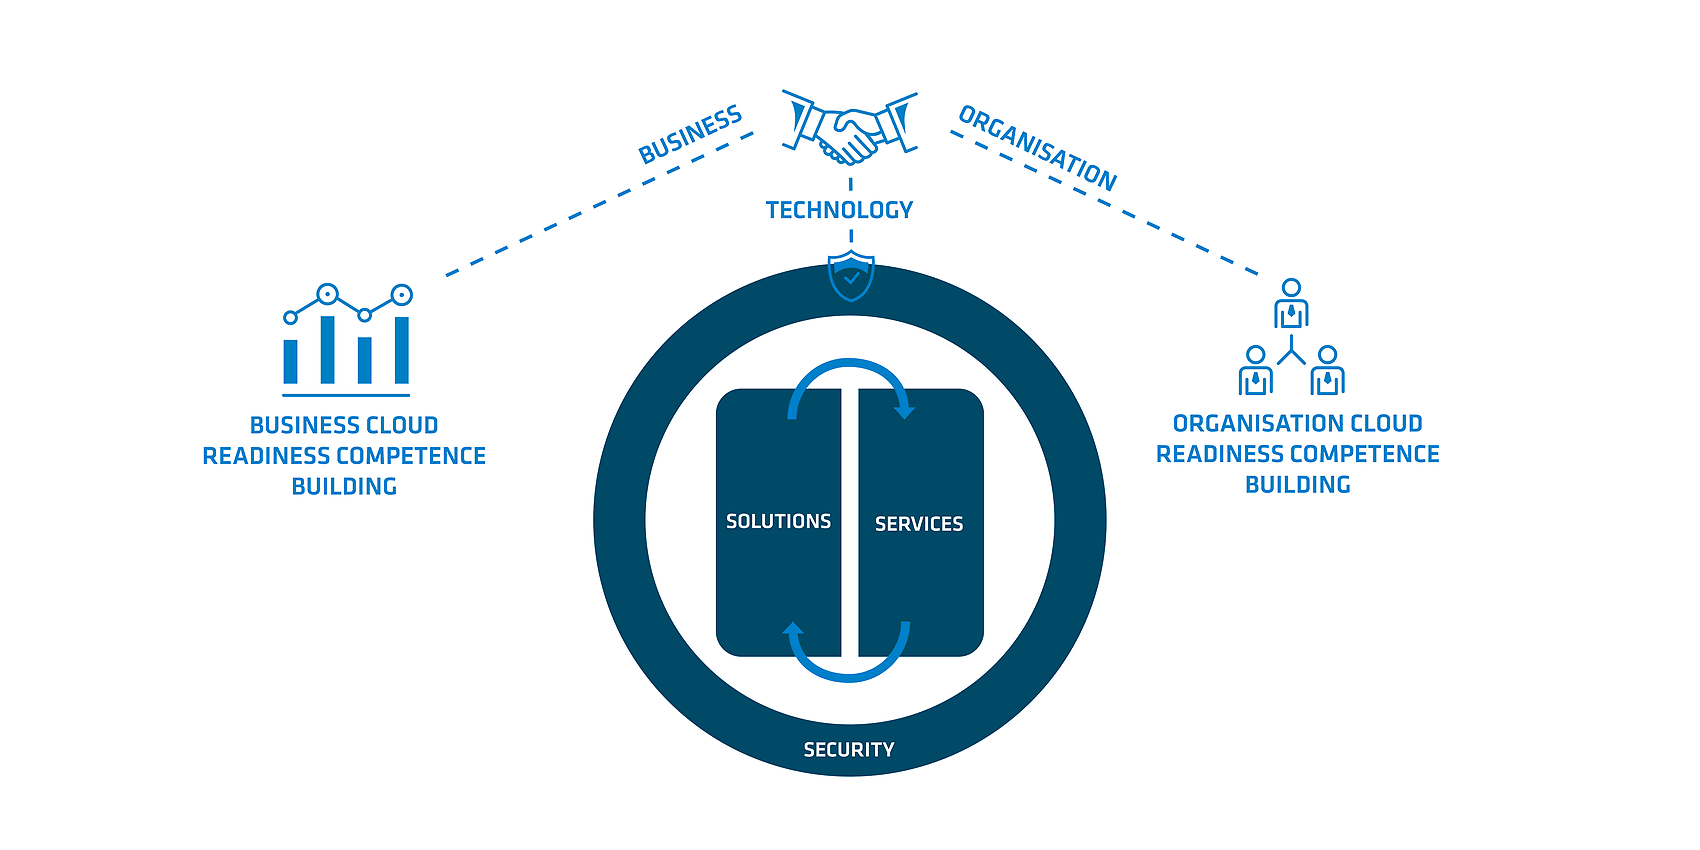 Our holistic cloud readiness approach 